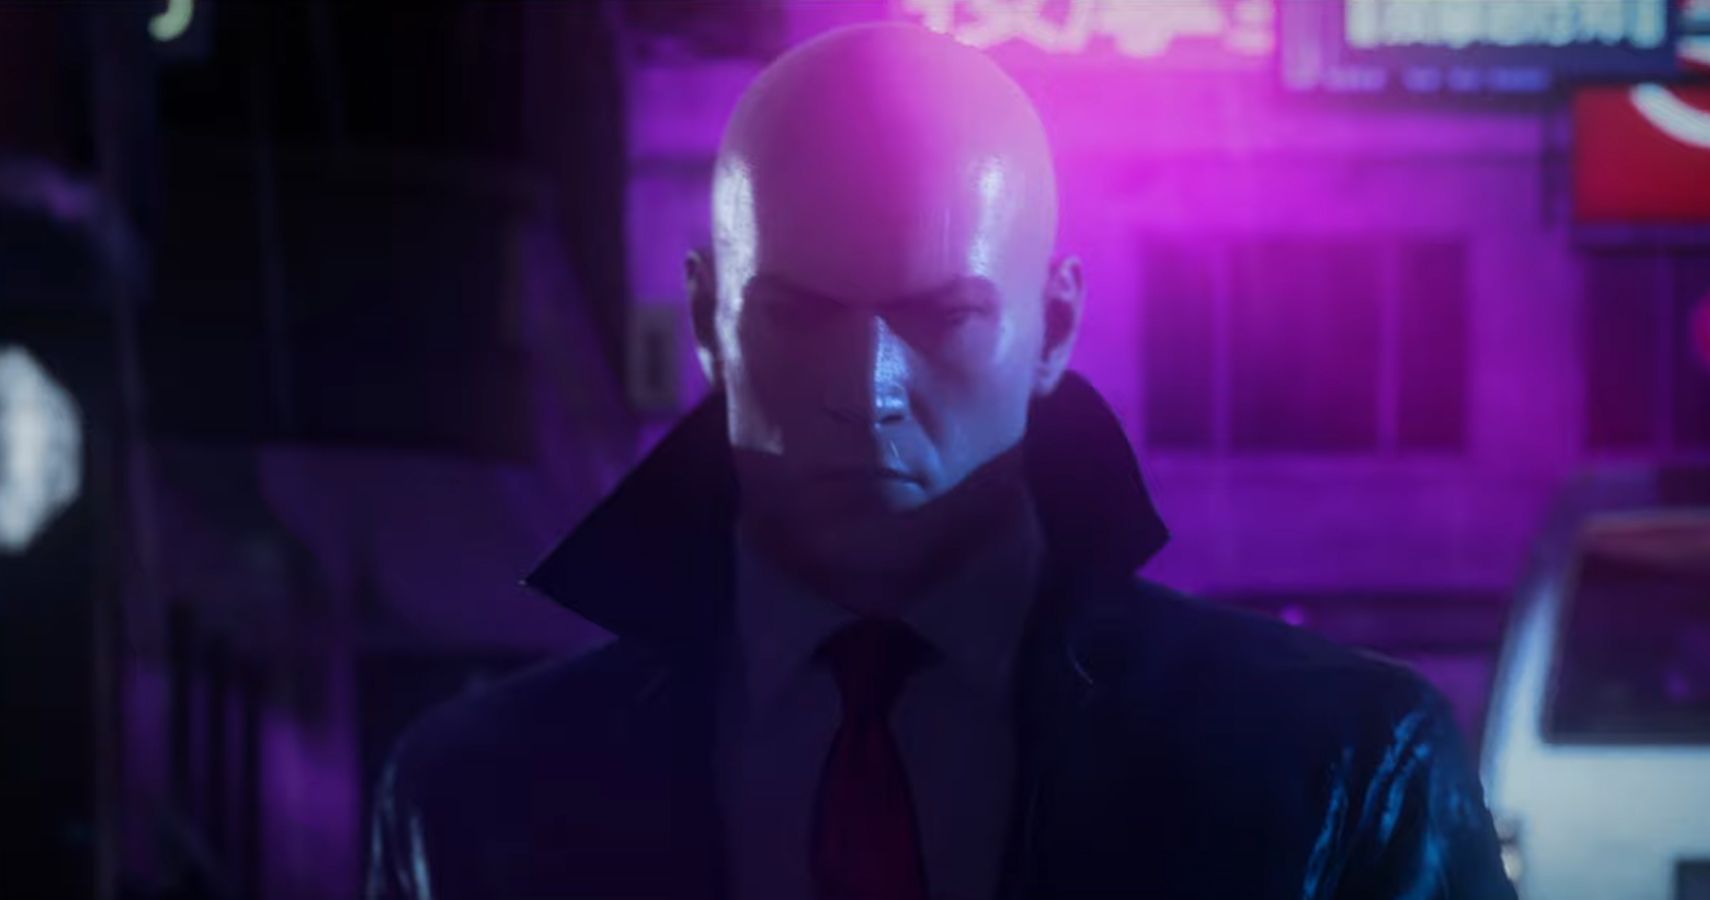 Hitman 3 Receives Next-Gen Graphics and a Fresh Location in New Trailer